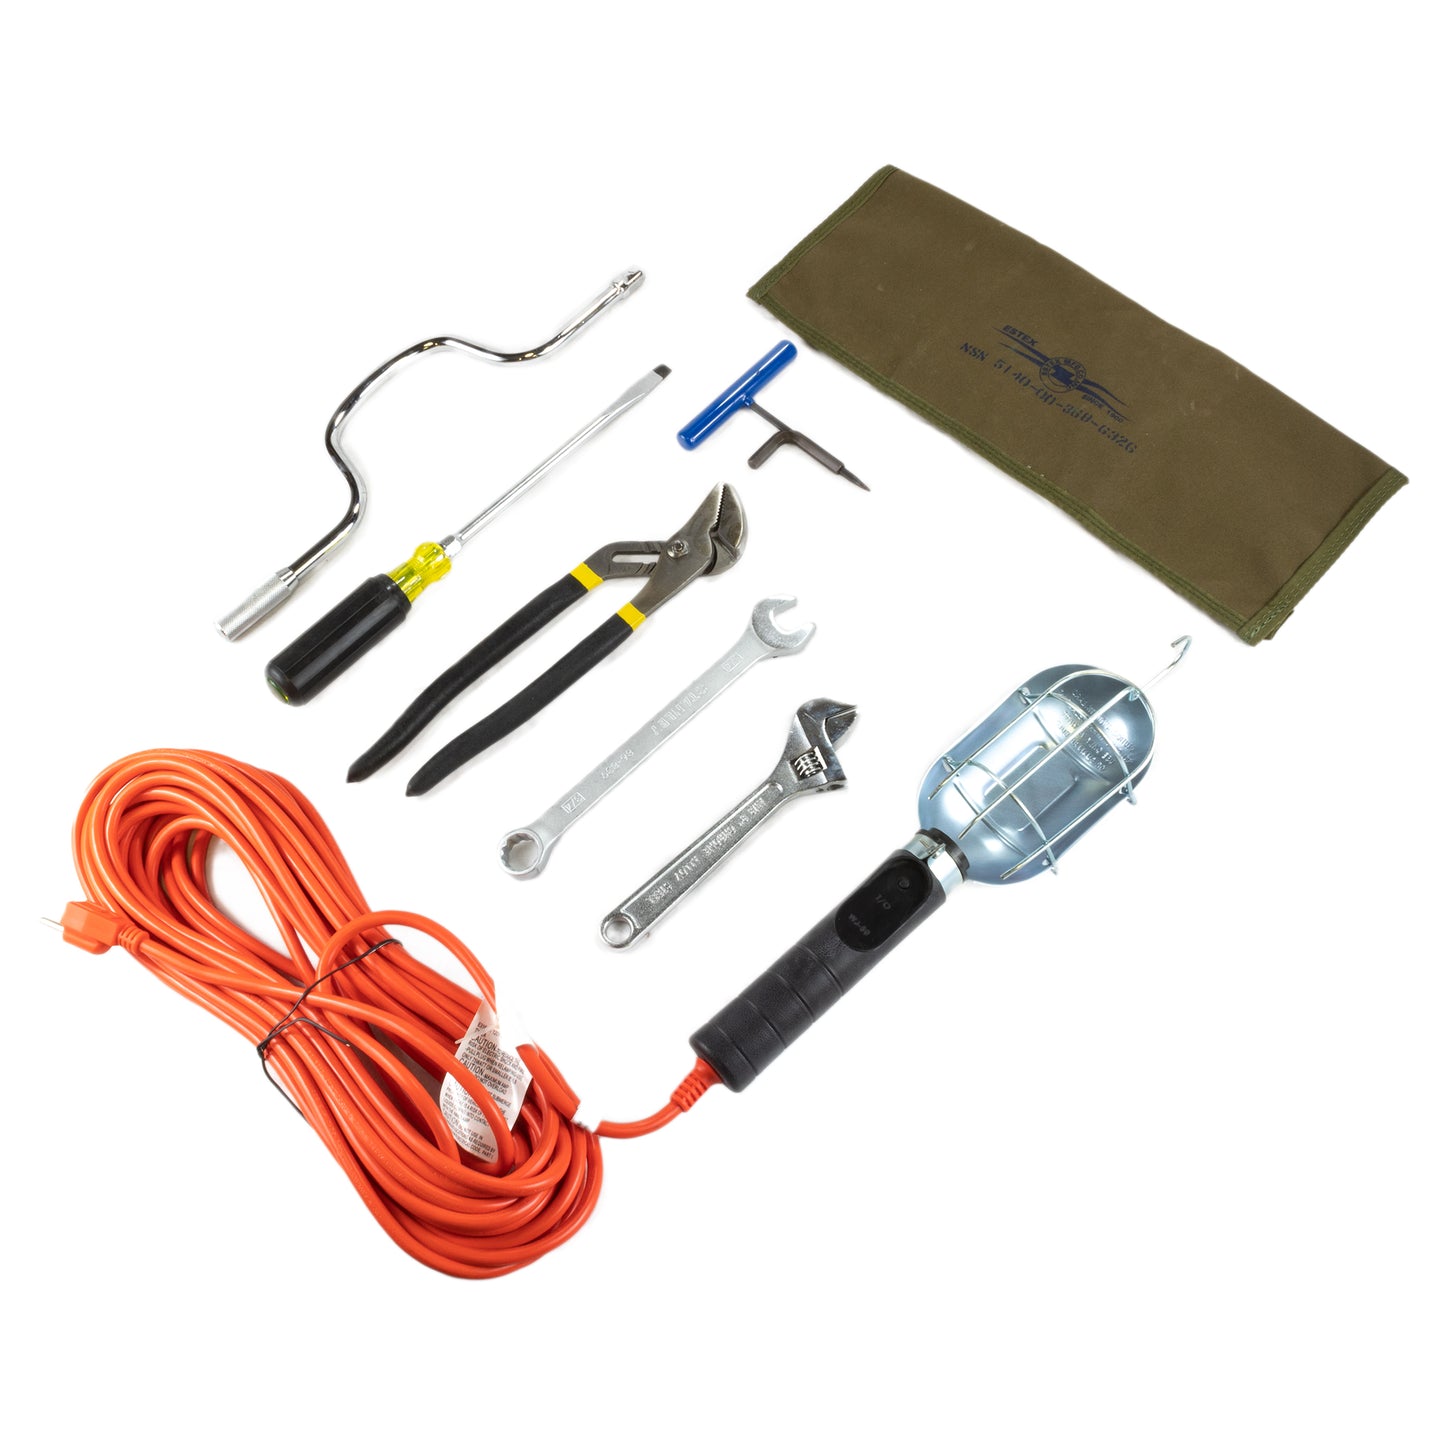 Military Issued Missile Tool Kit With 50 Foot Extension Lamp - USA Supply